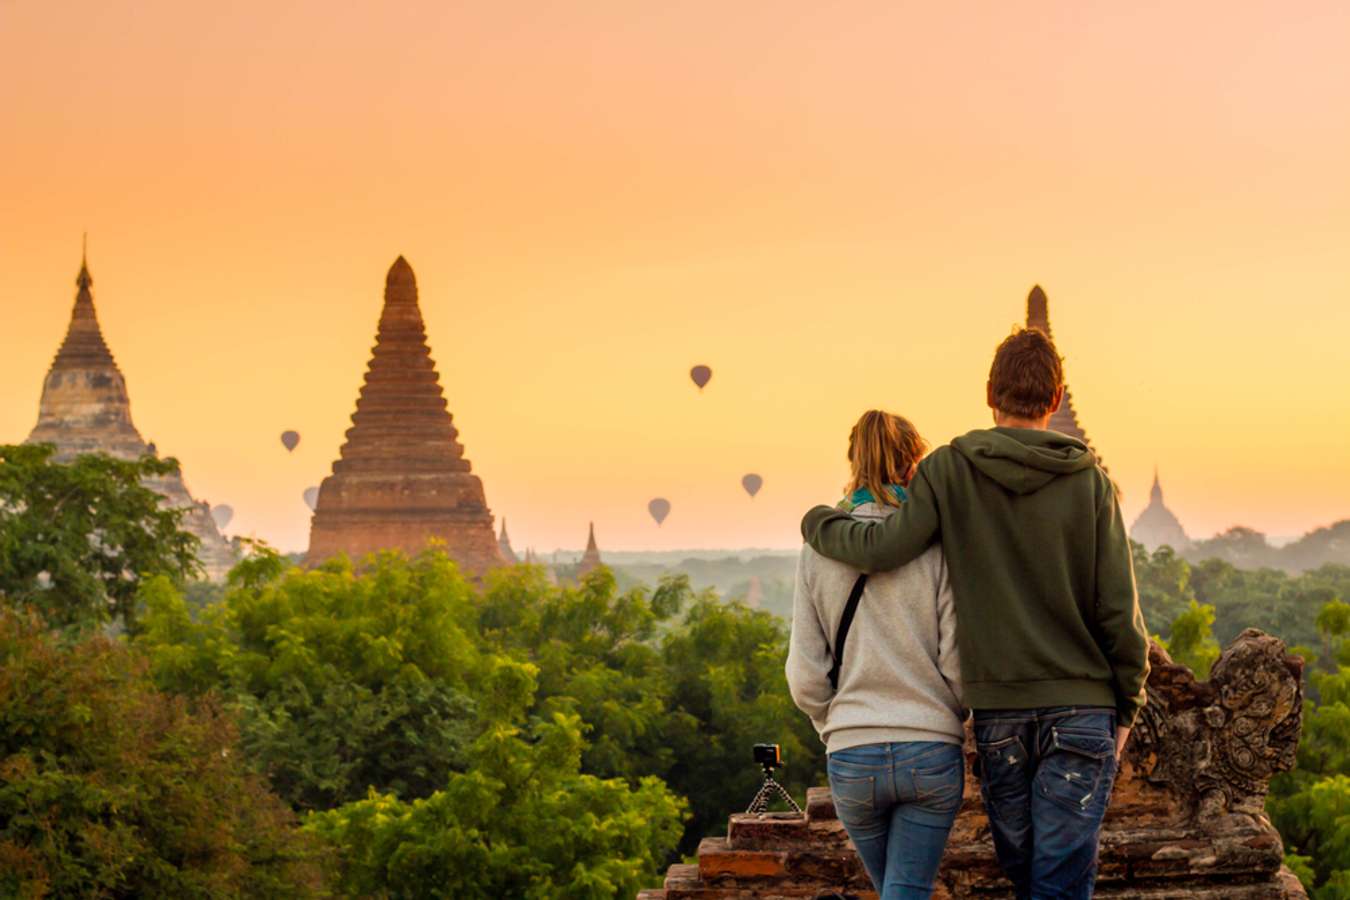 Bagan - Best Place for Honeymoon